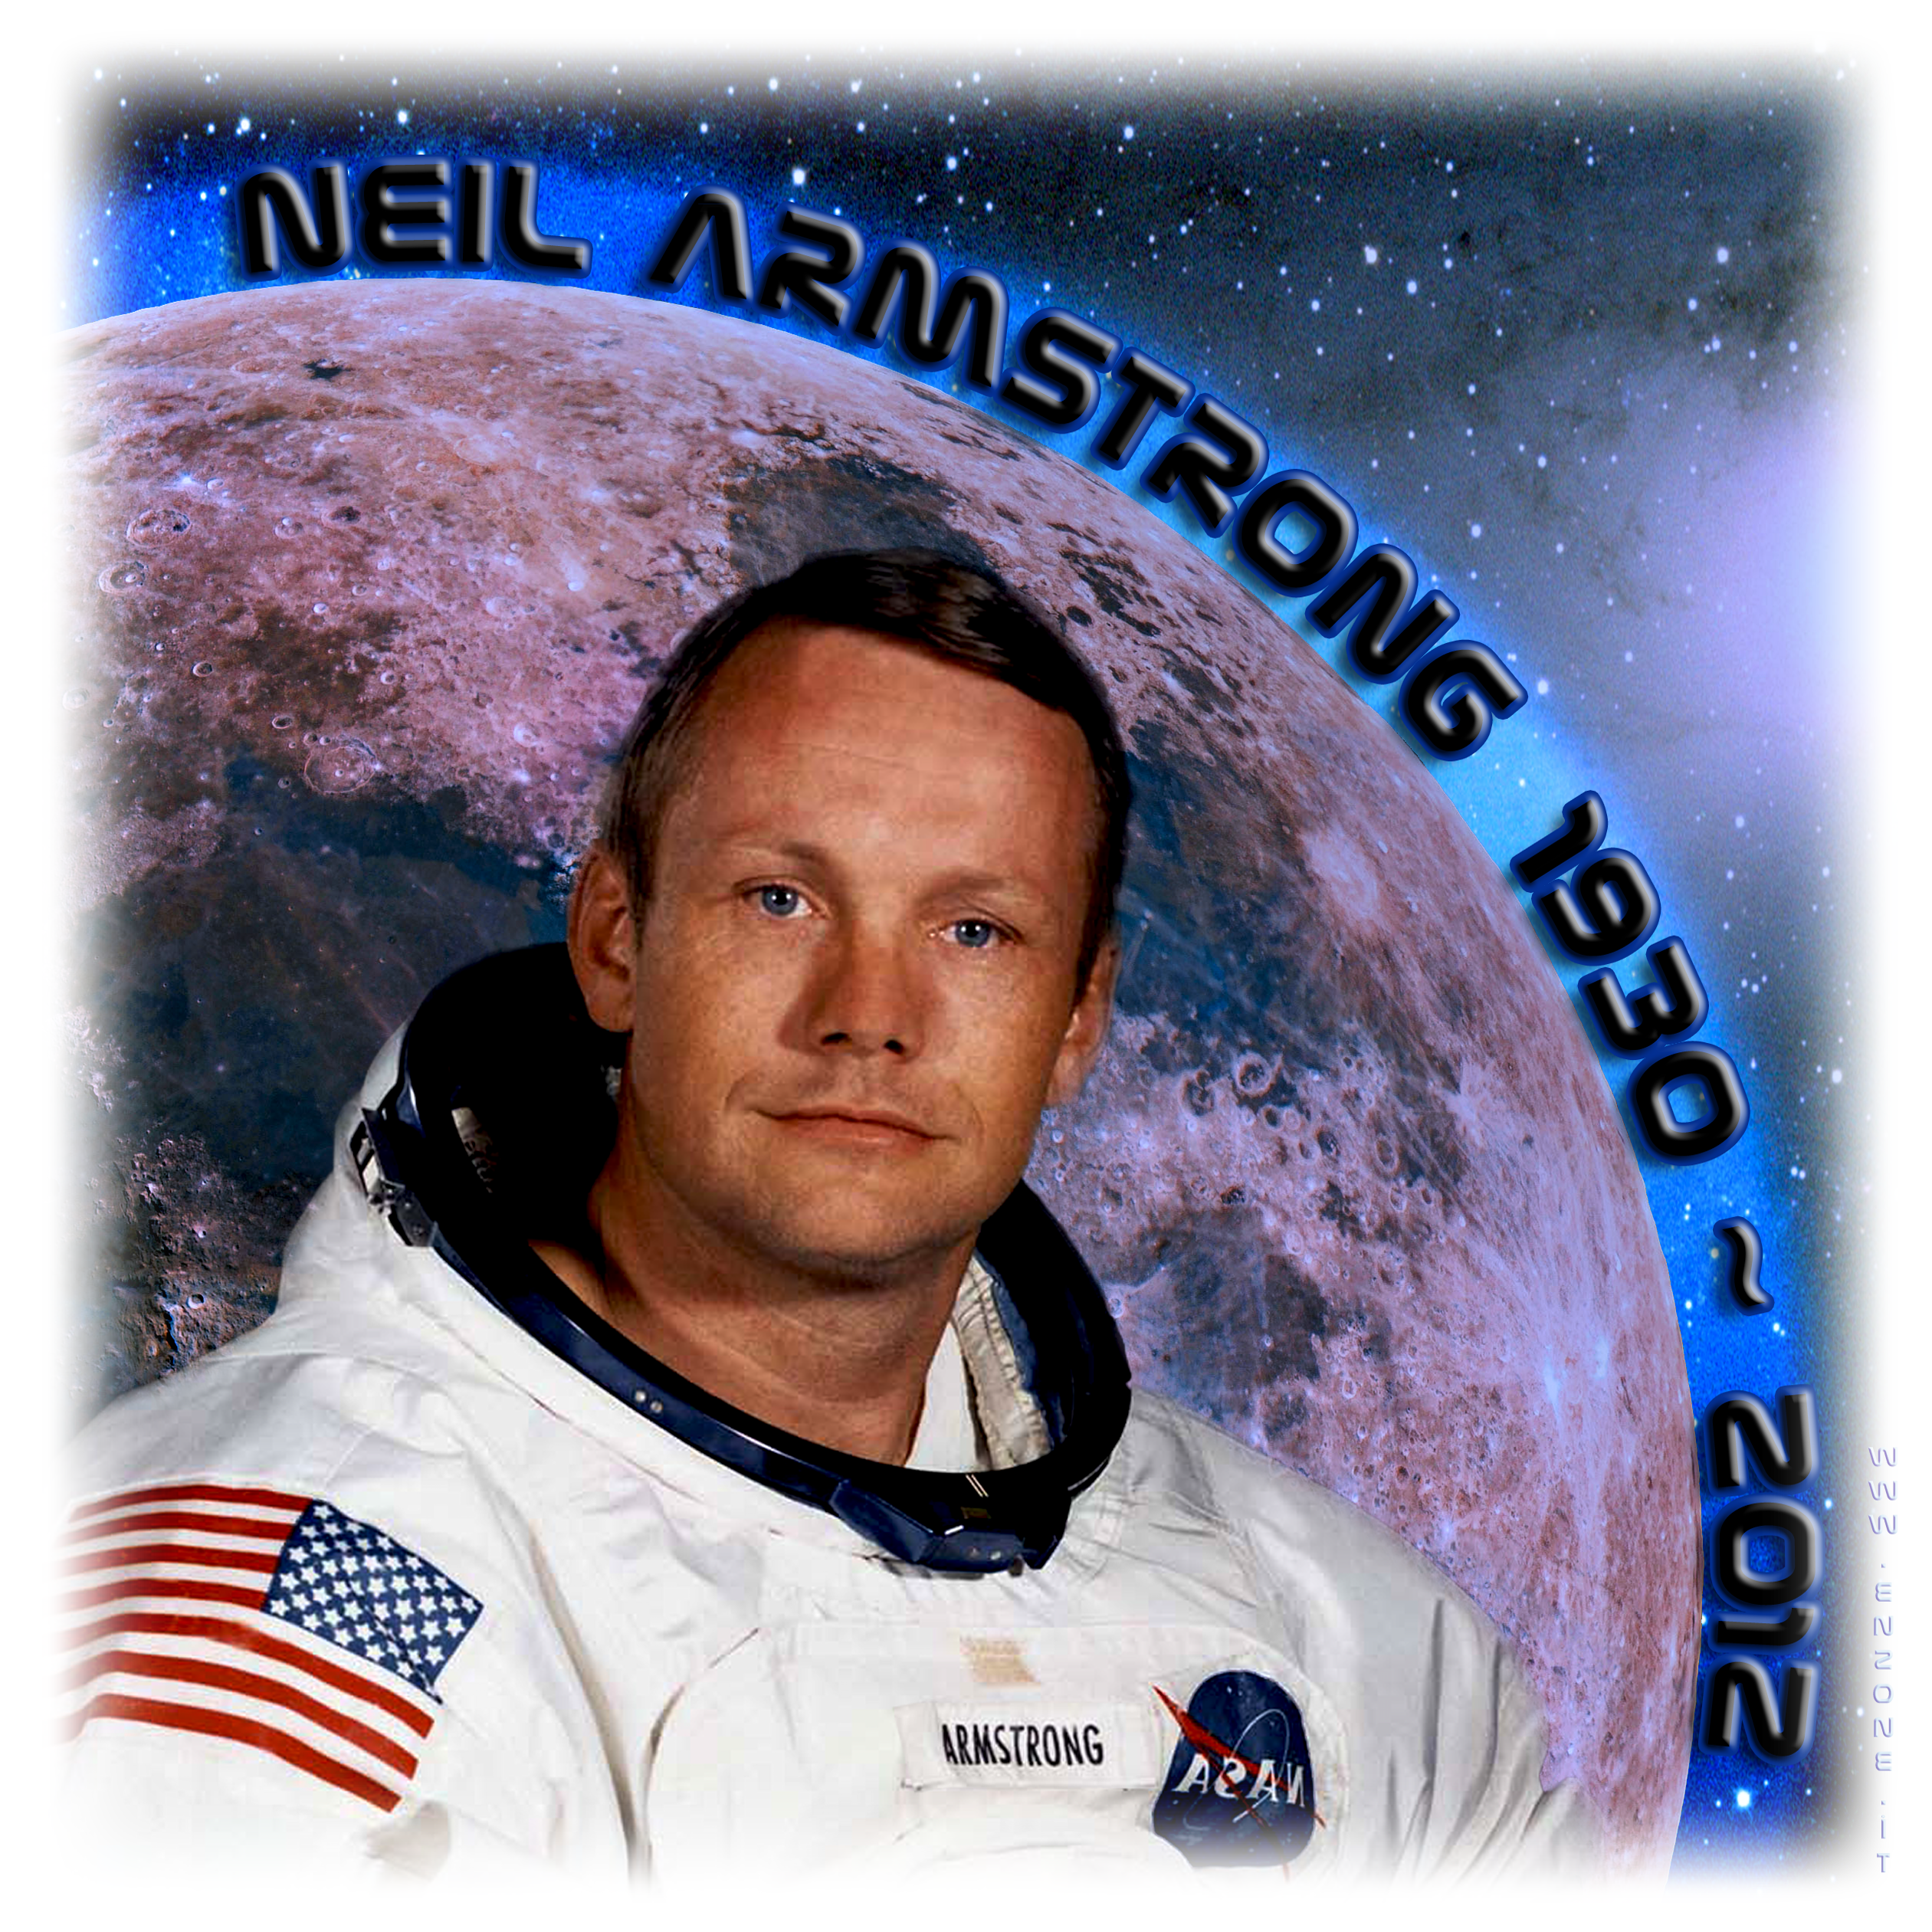 Neil Armstrong #8